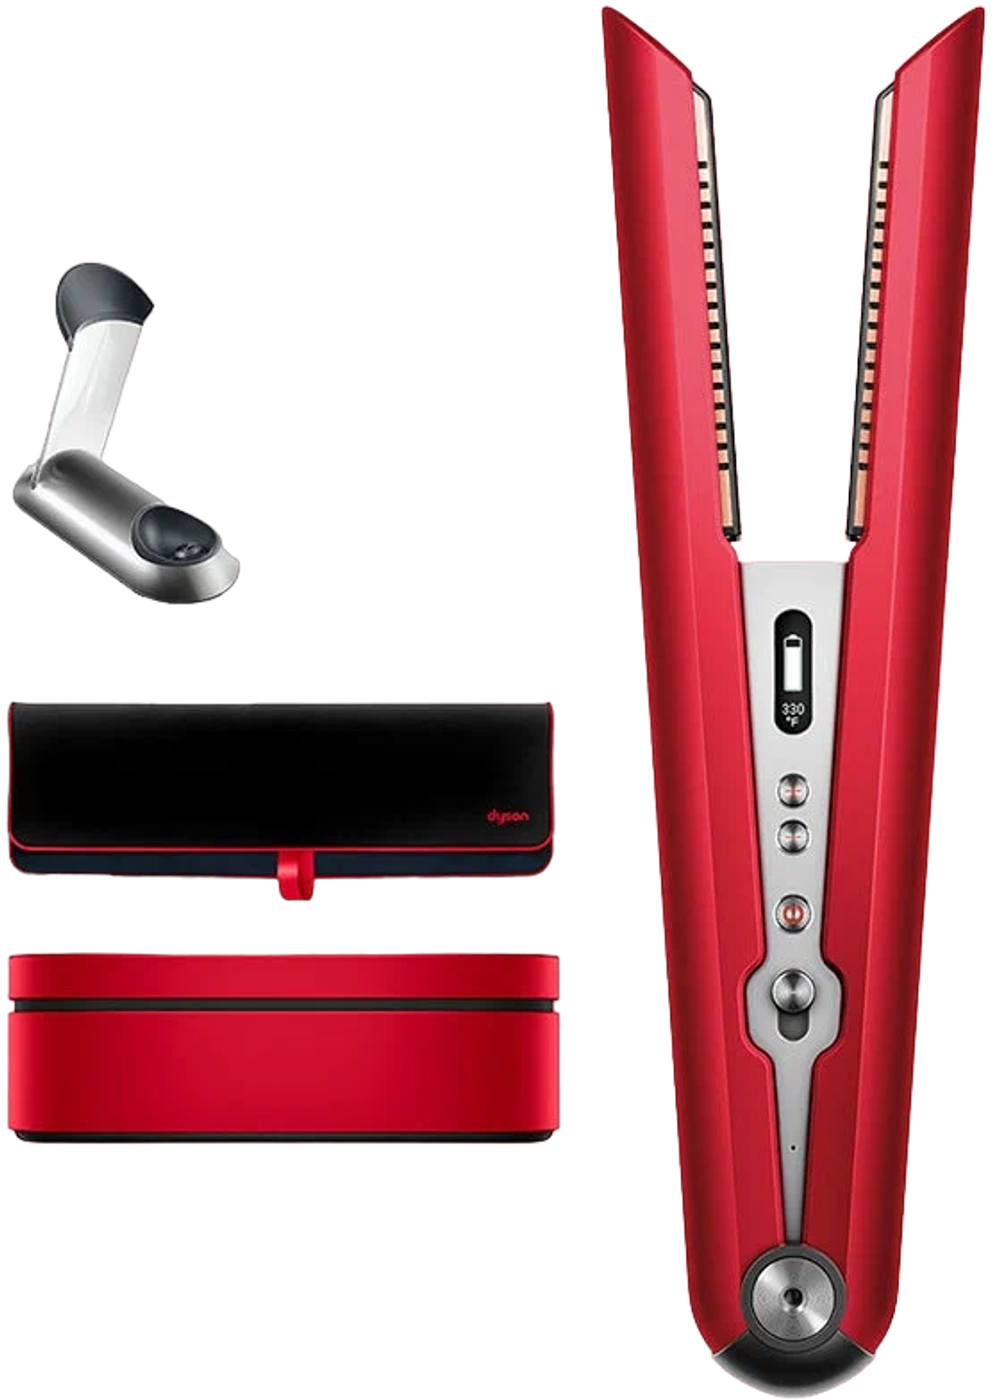 Dyson Corrale HS03 gift edition, Red/Nickel